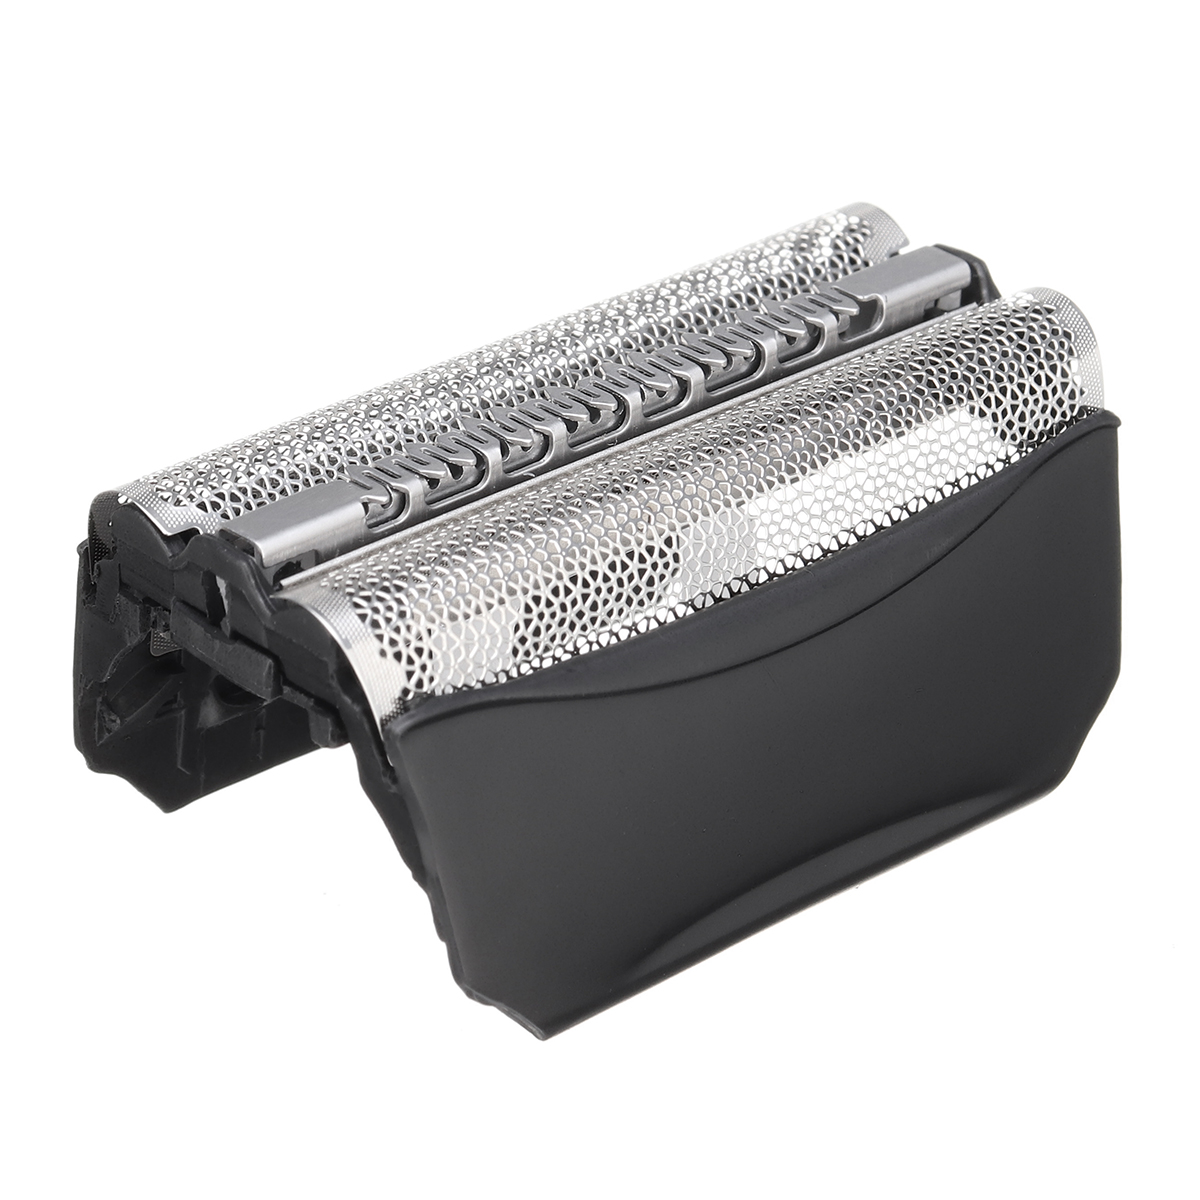 

Portable Shaver Foil Replacement For Braun Wfs1 Wfs2 530 550